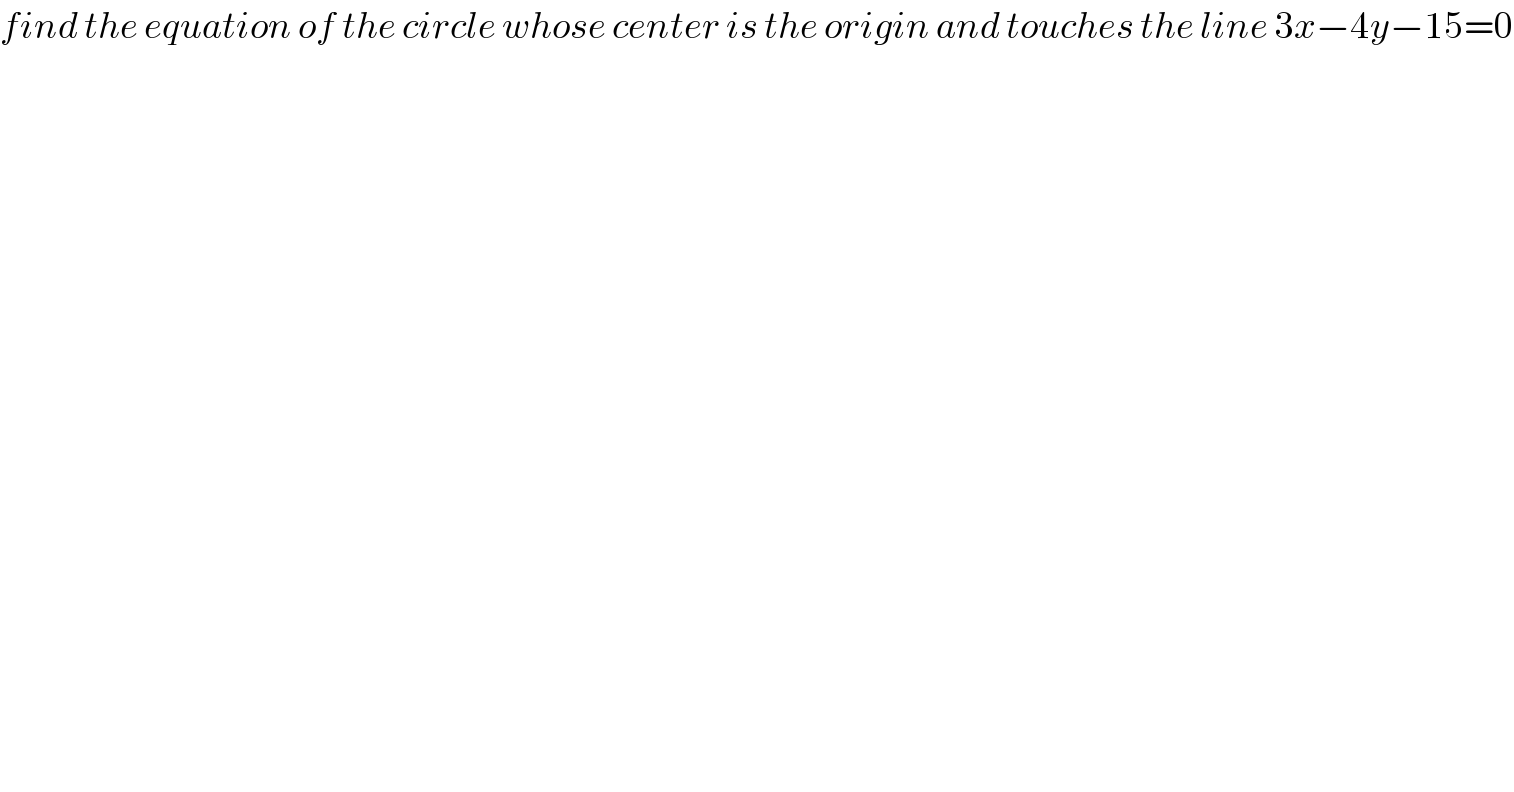 find the equation of the circle whose center is the origin and touches the line 3x−4y−15=0  